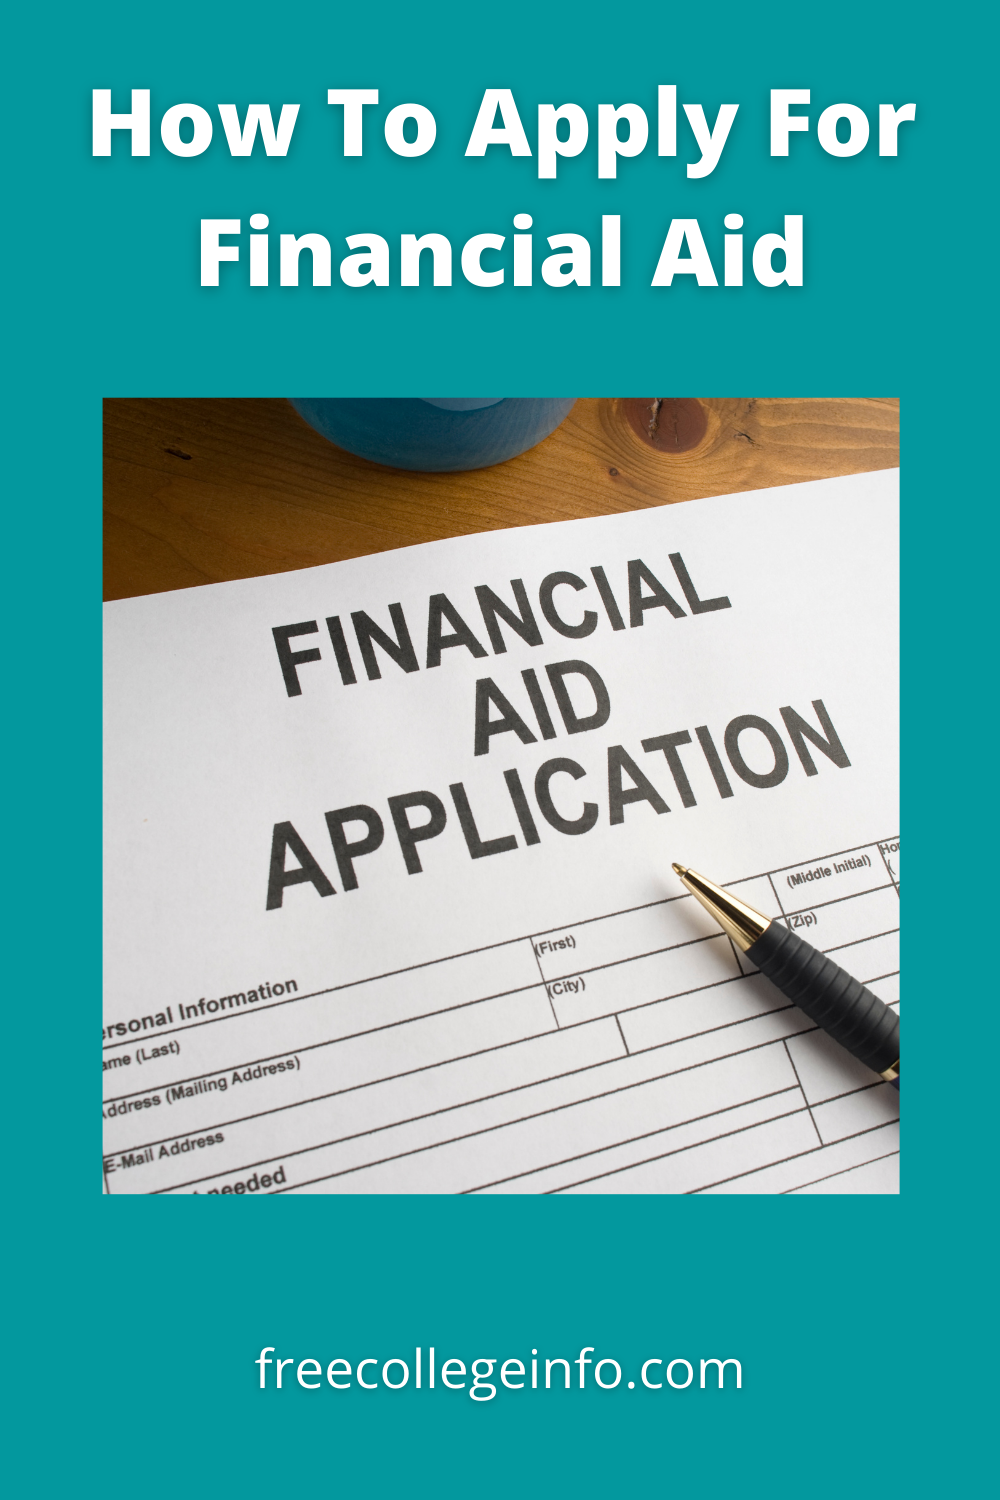 How To Apply For Financial Aid